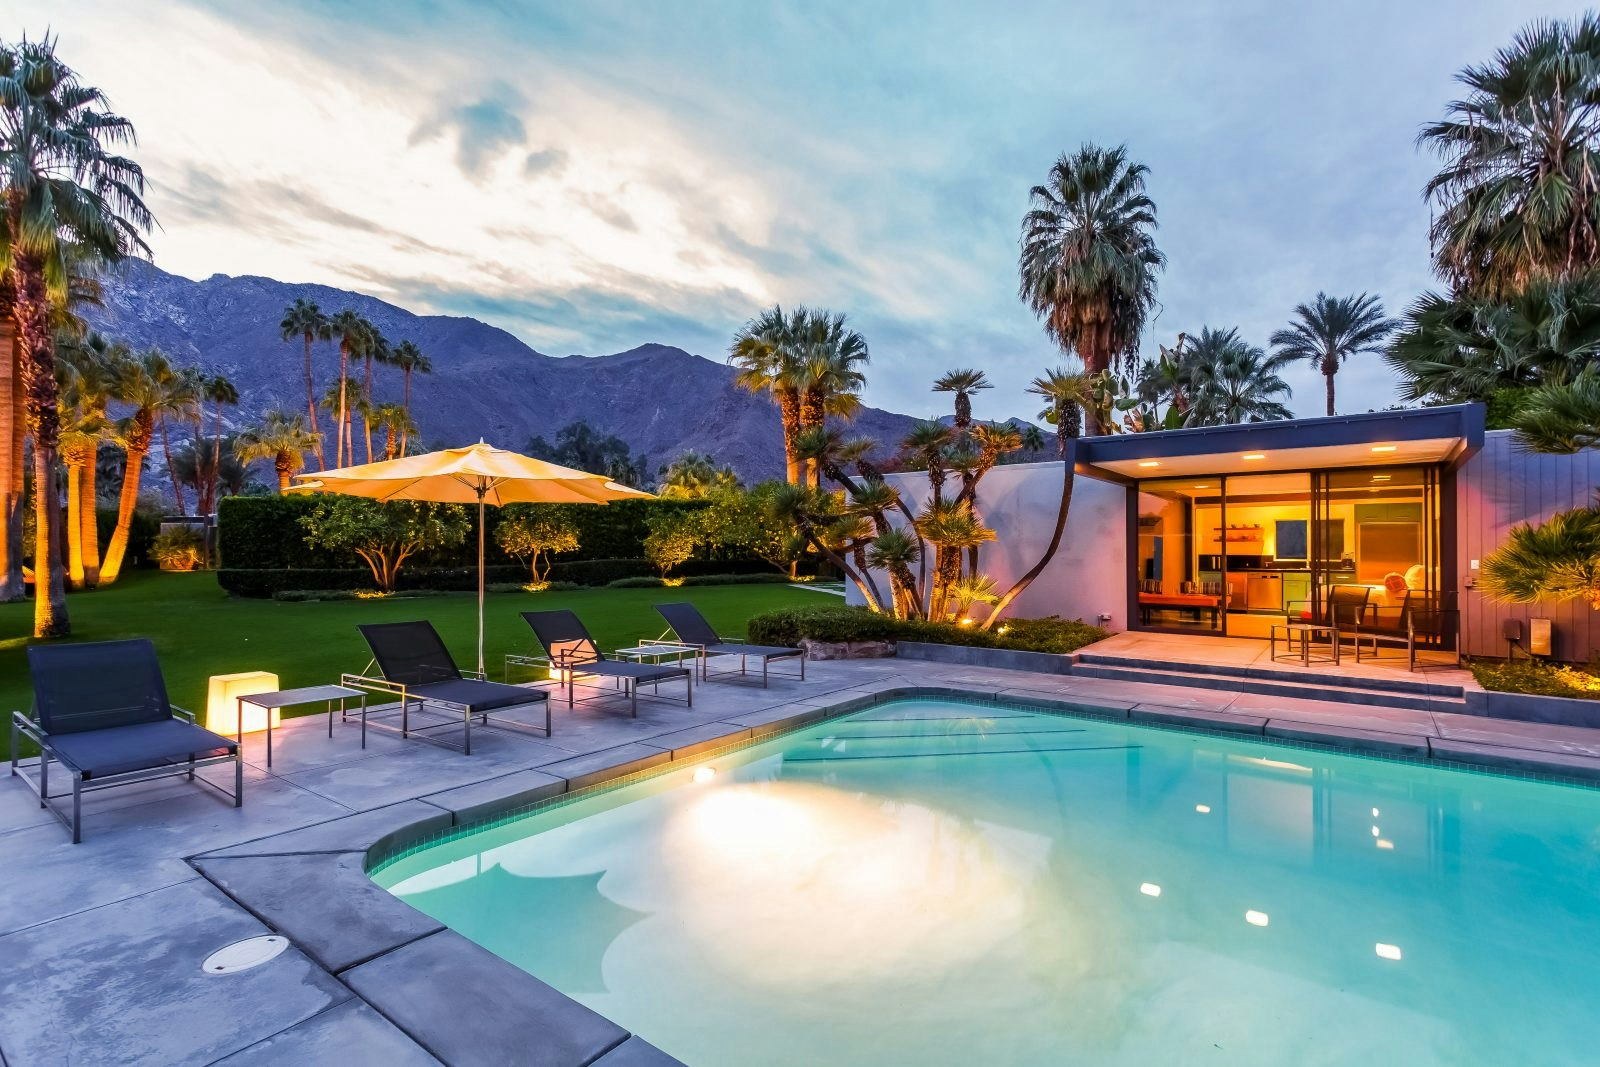 The back of the house and swimming pool at the Wexler-designed Dinah Shore House in Palm Springs, California © Palm Springs Bureau of Tourism